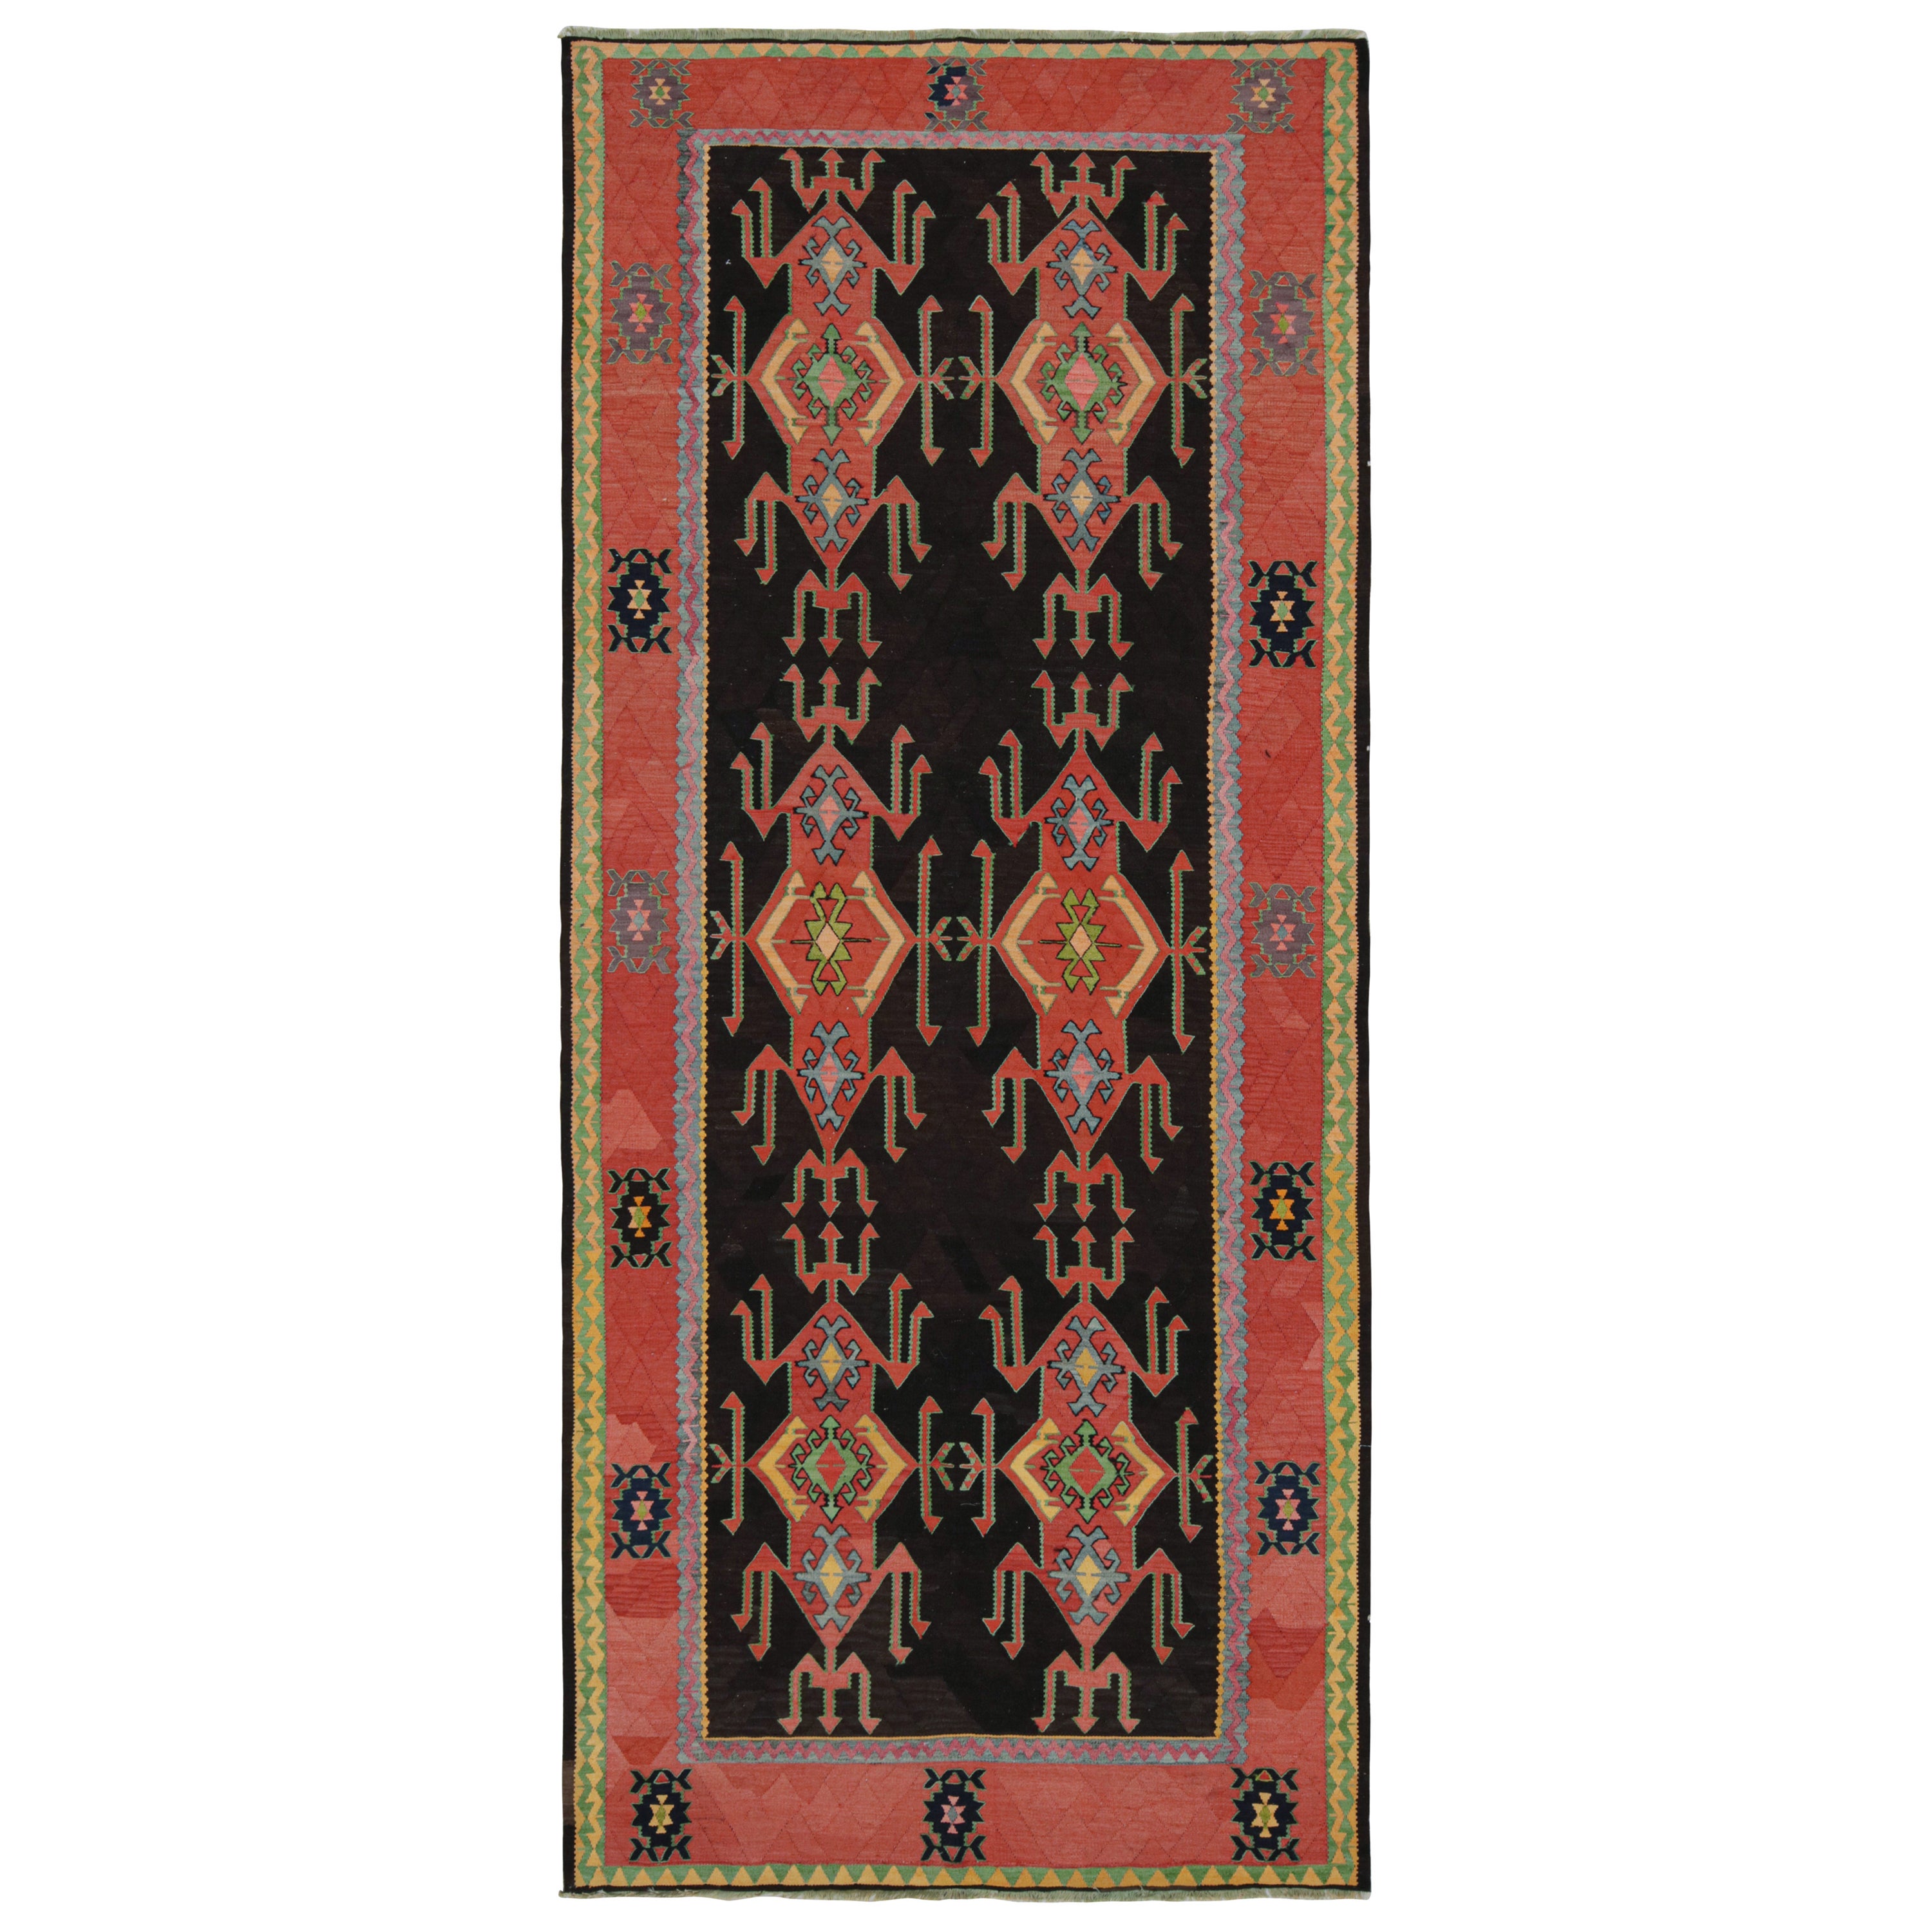 Vintage Persian Kilim with Red Patterns on a Black Field, from Rug & Kilim